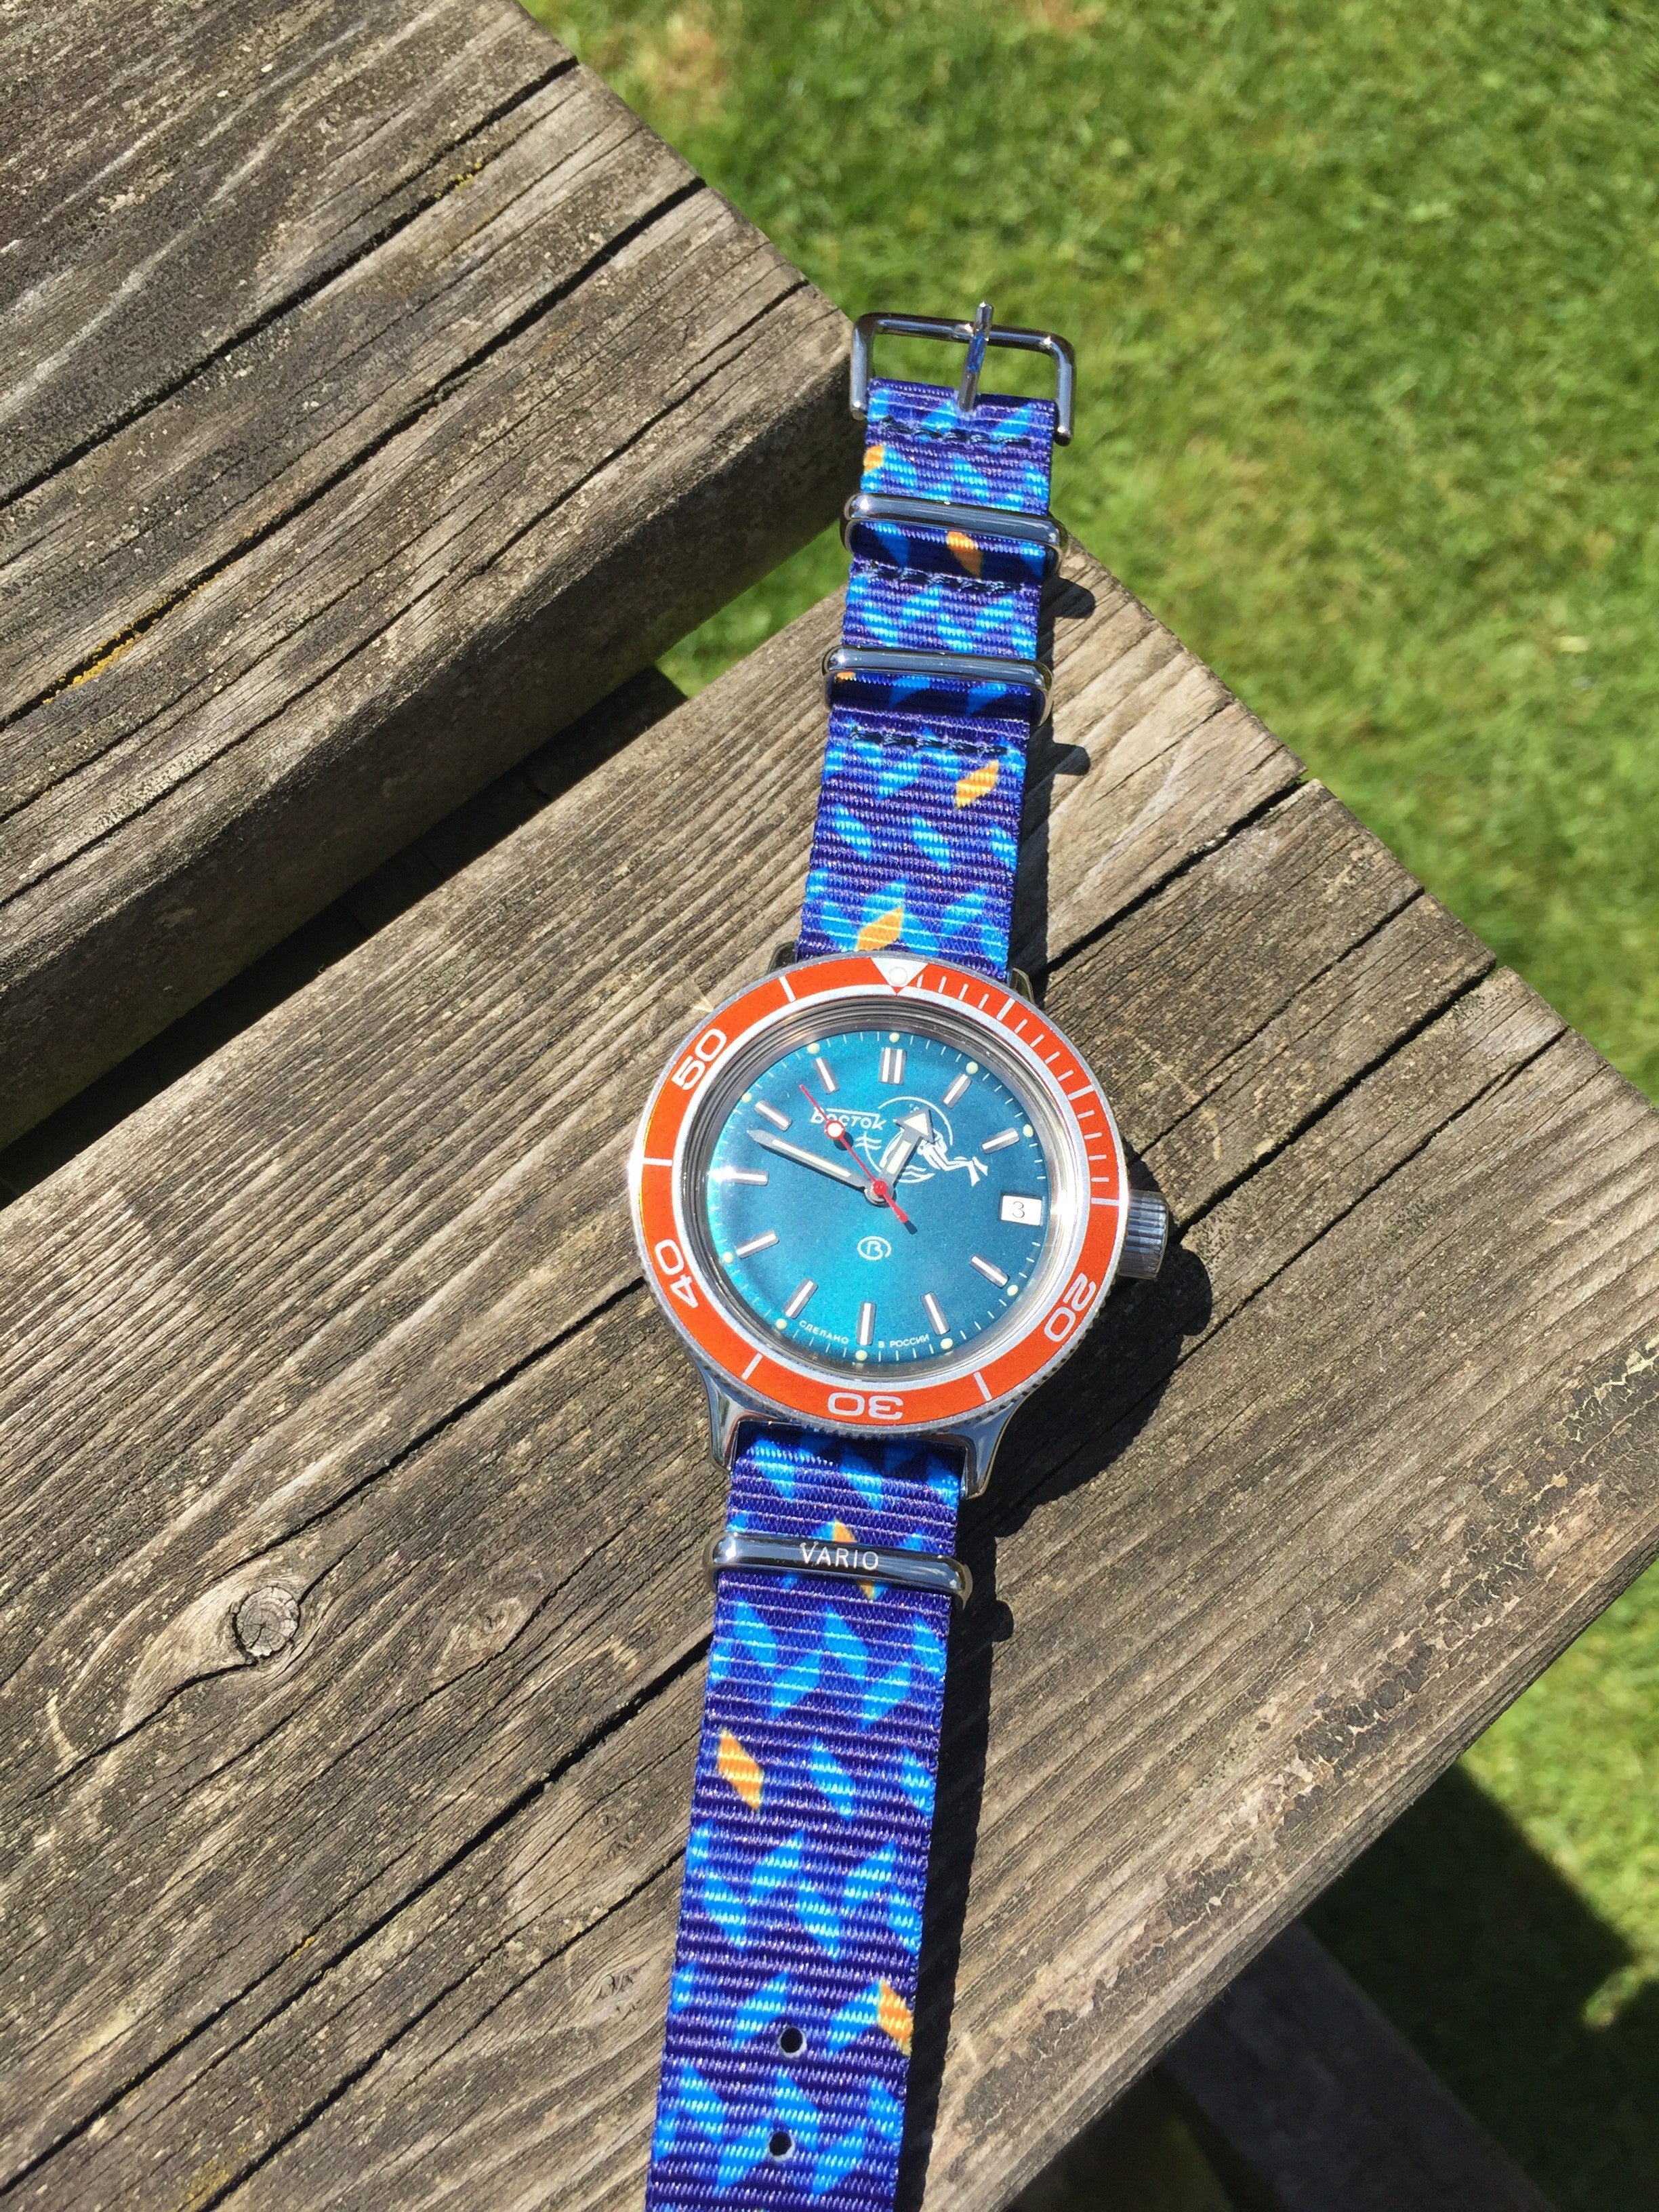 Vostok watch with Vario graphic strap by #varioeveryday member @gjphil